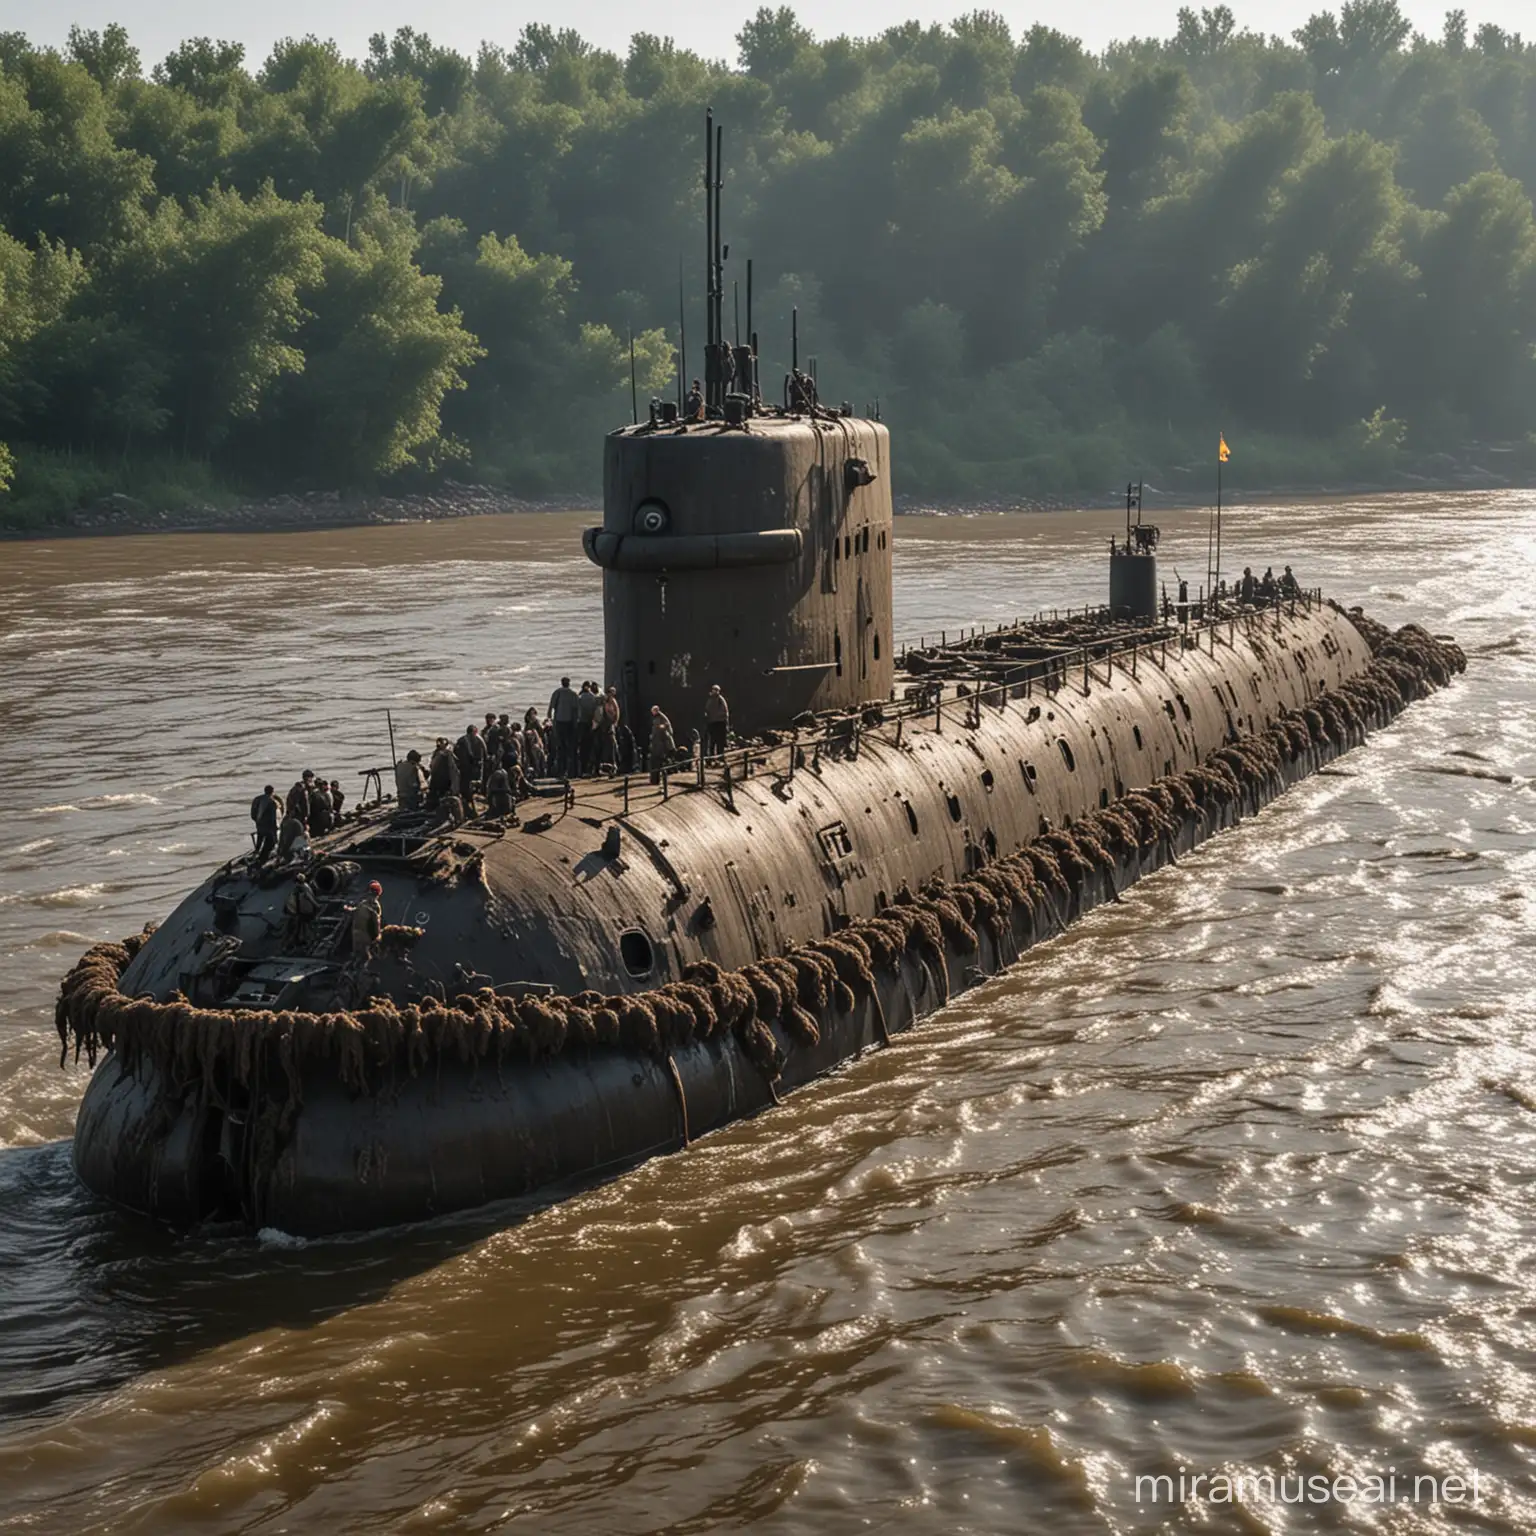 Hinus submarine made of shit on Big River full of shit and crew on top of boat